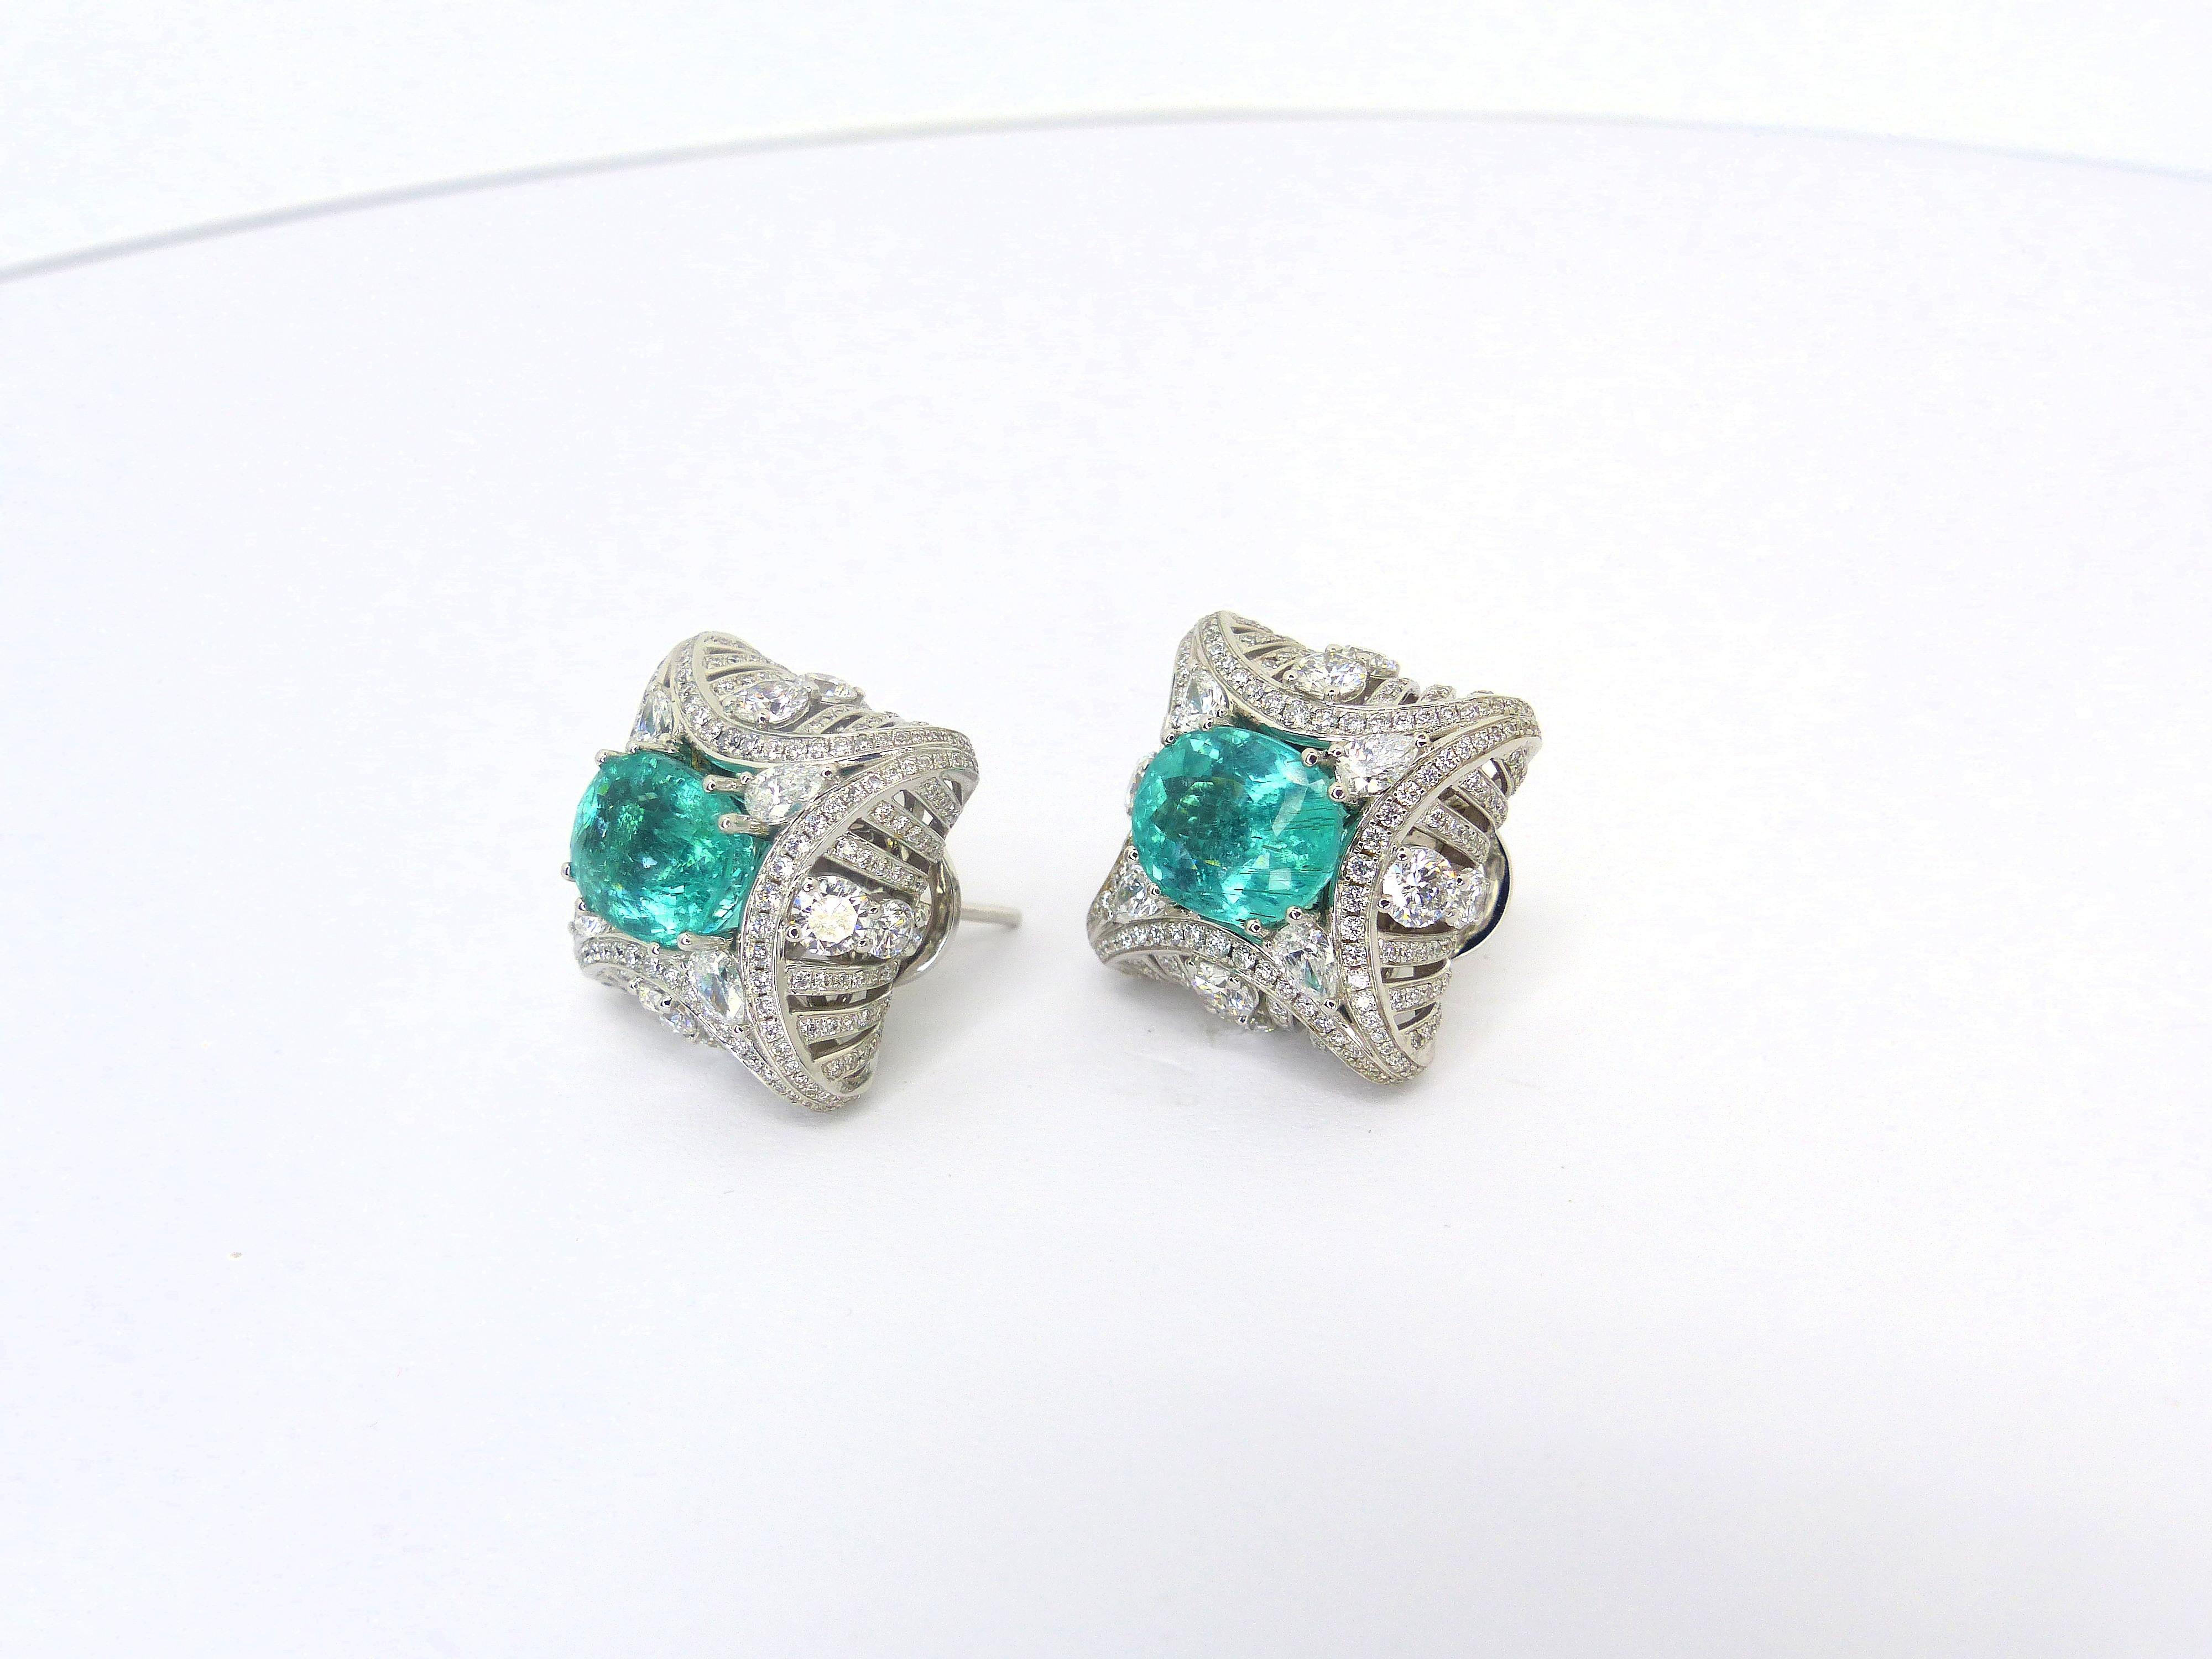 This 750/White Gold Earrings are set with 2 fine Paraiba Tourmaline fac. oval 9,5x7,8mm + Diamonds in various shapes, 4,43cts. D/VS. With clips and studs.

Paraiba Tourmalines are very popular and rare gemstones. The color is electric neon